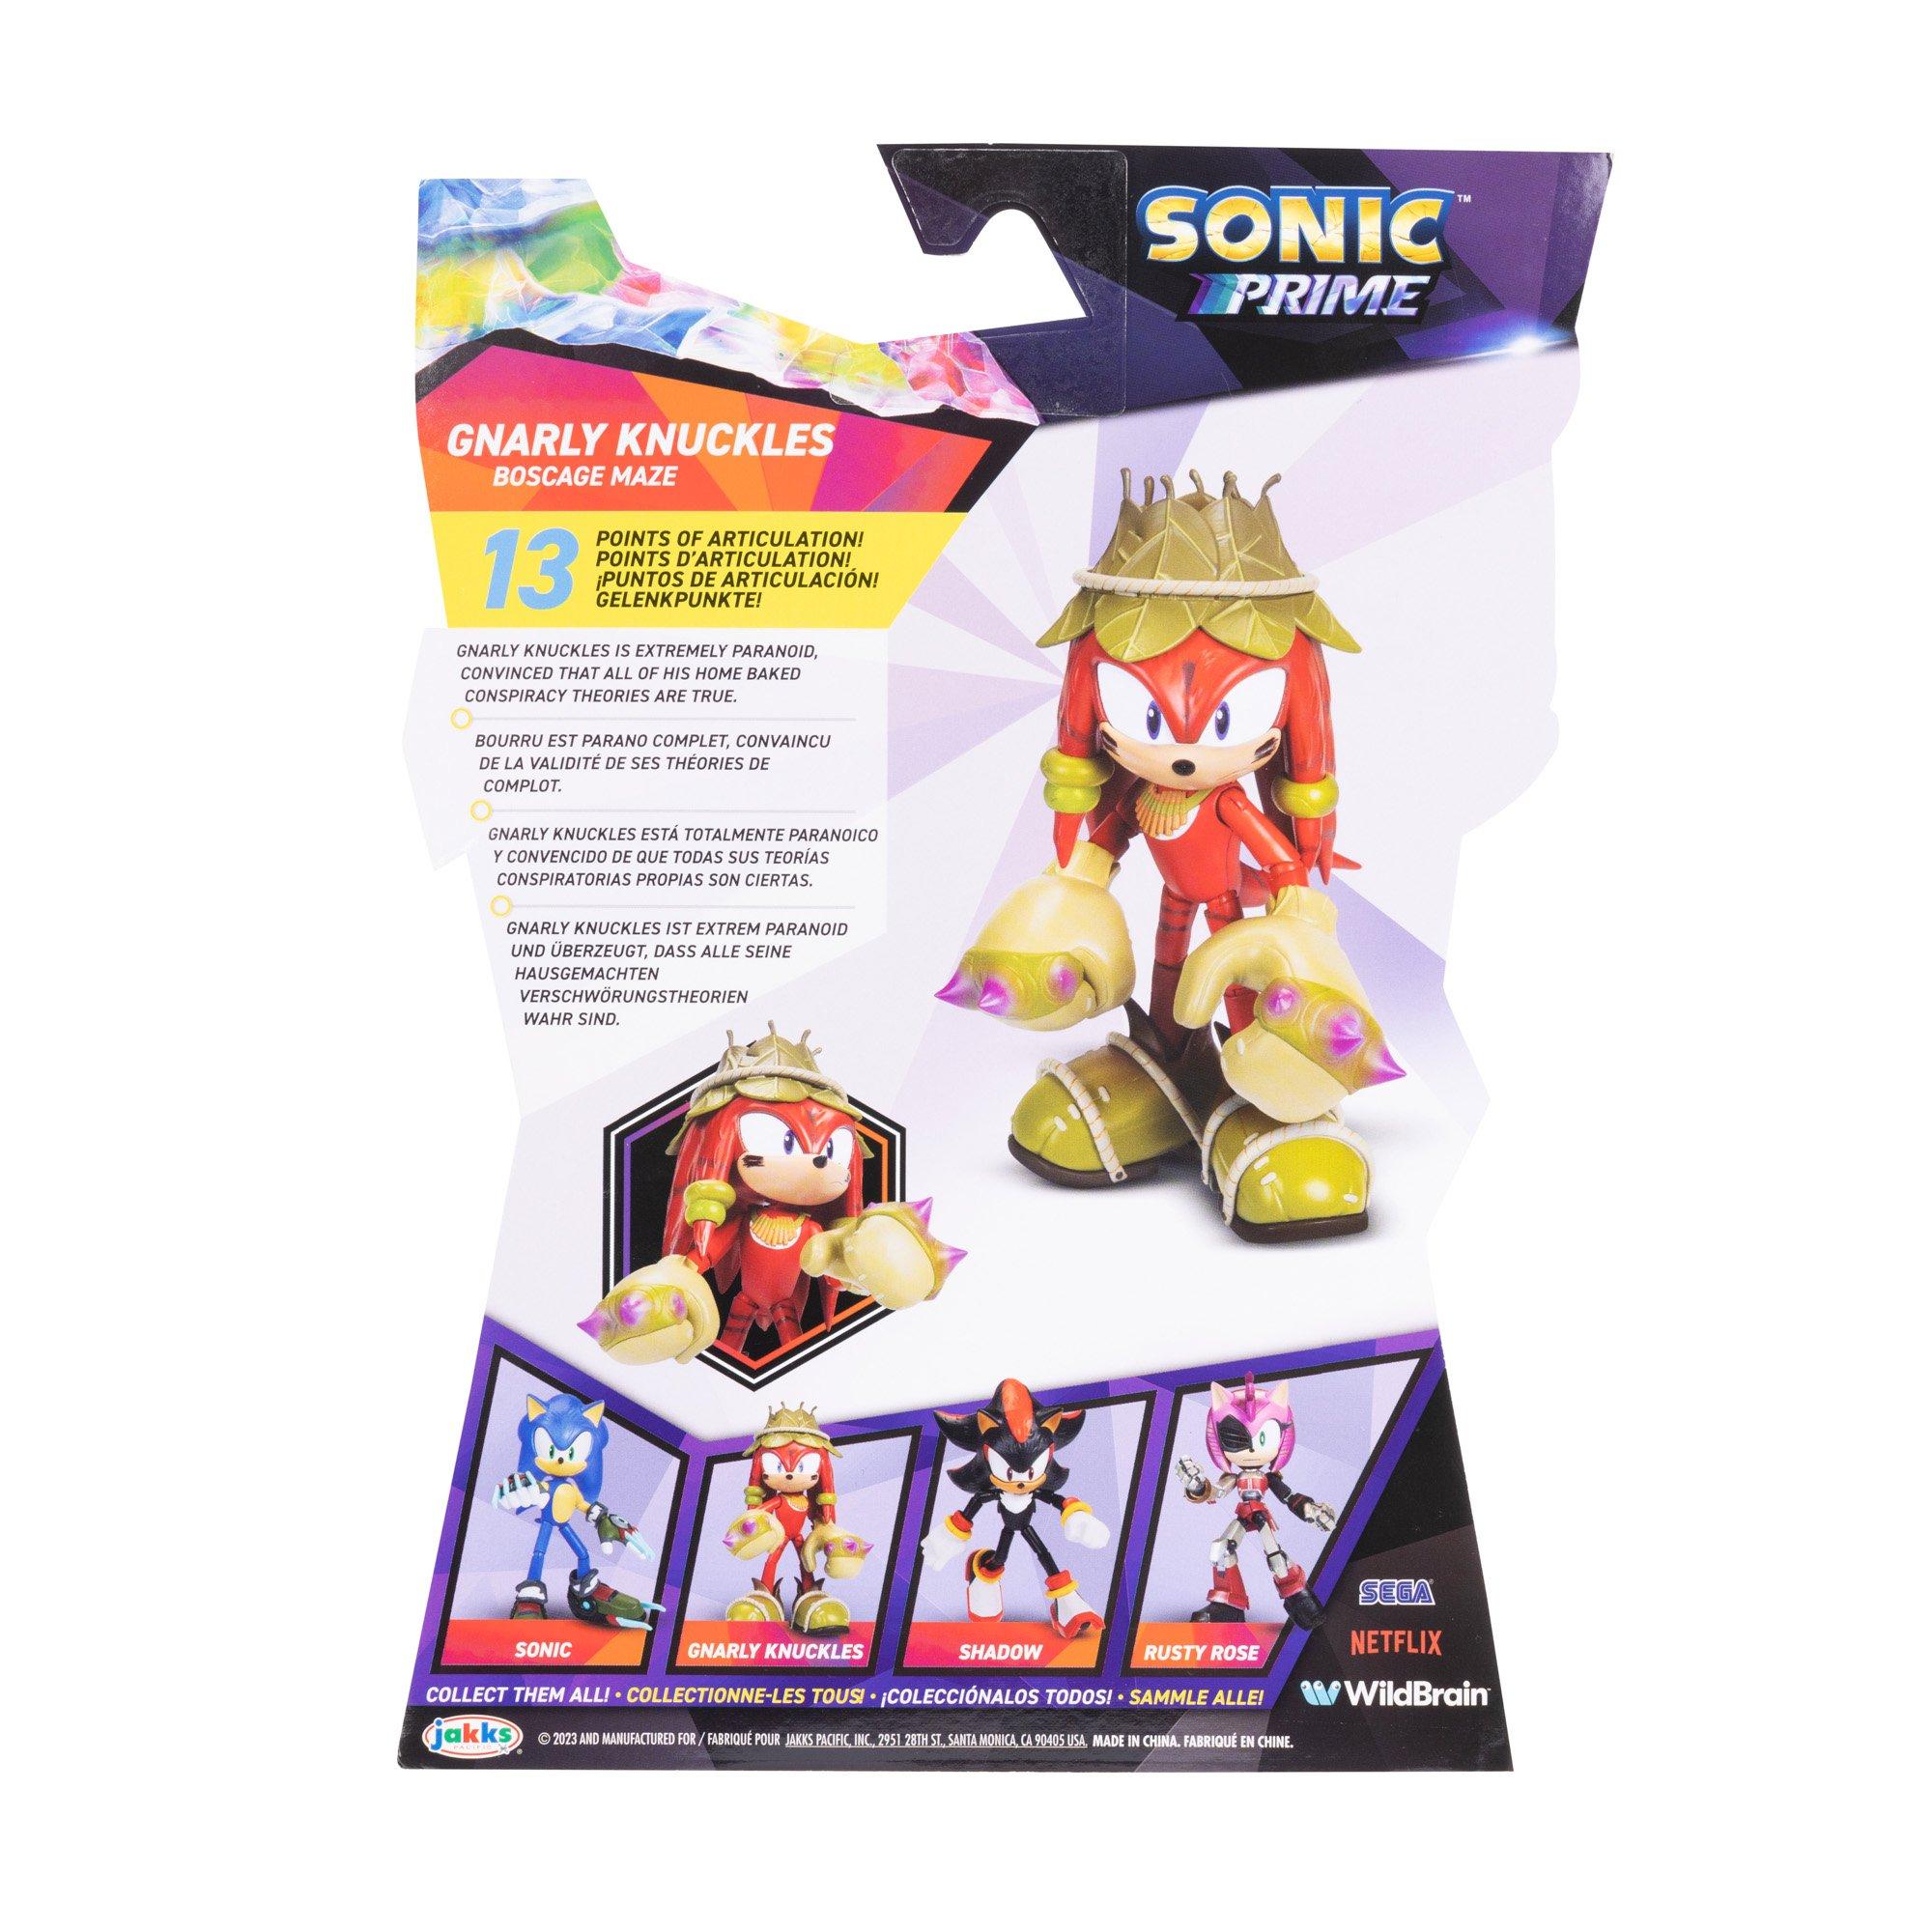 Knuckles the Dread's Pirate Ship and Sonic Prime 2.5 Figures On